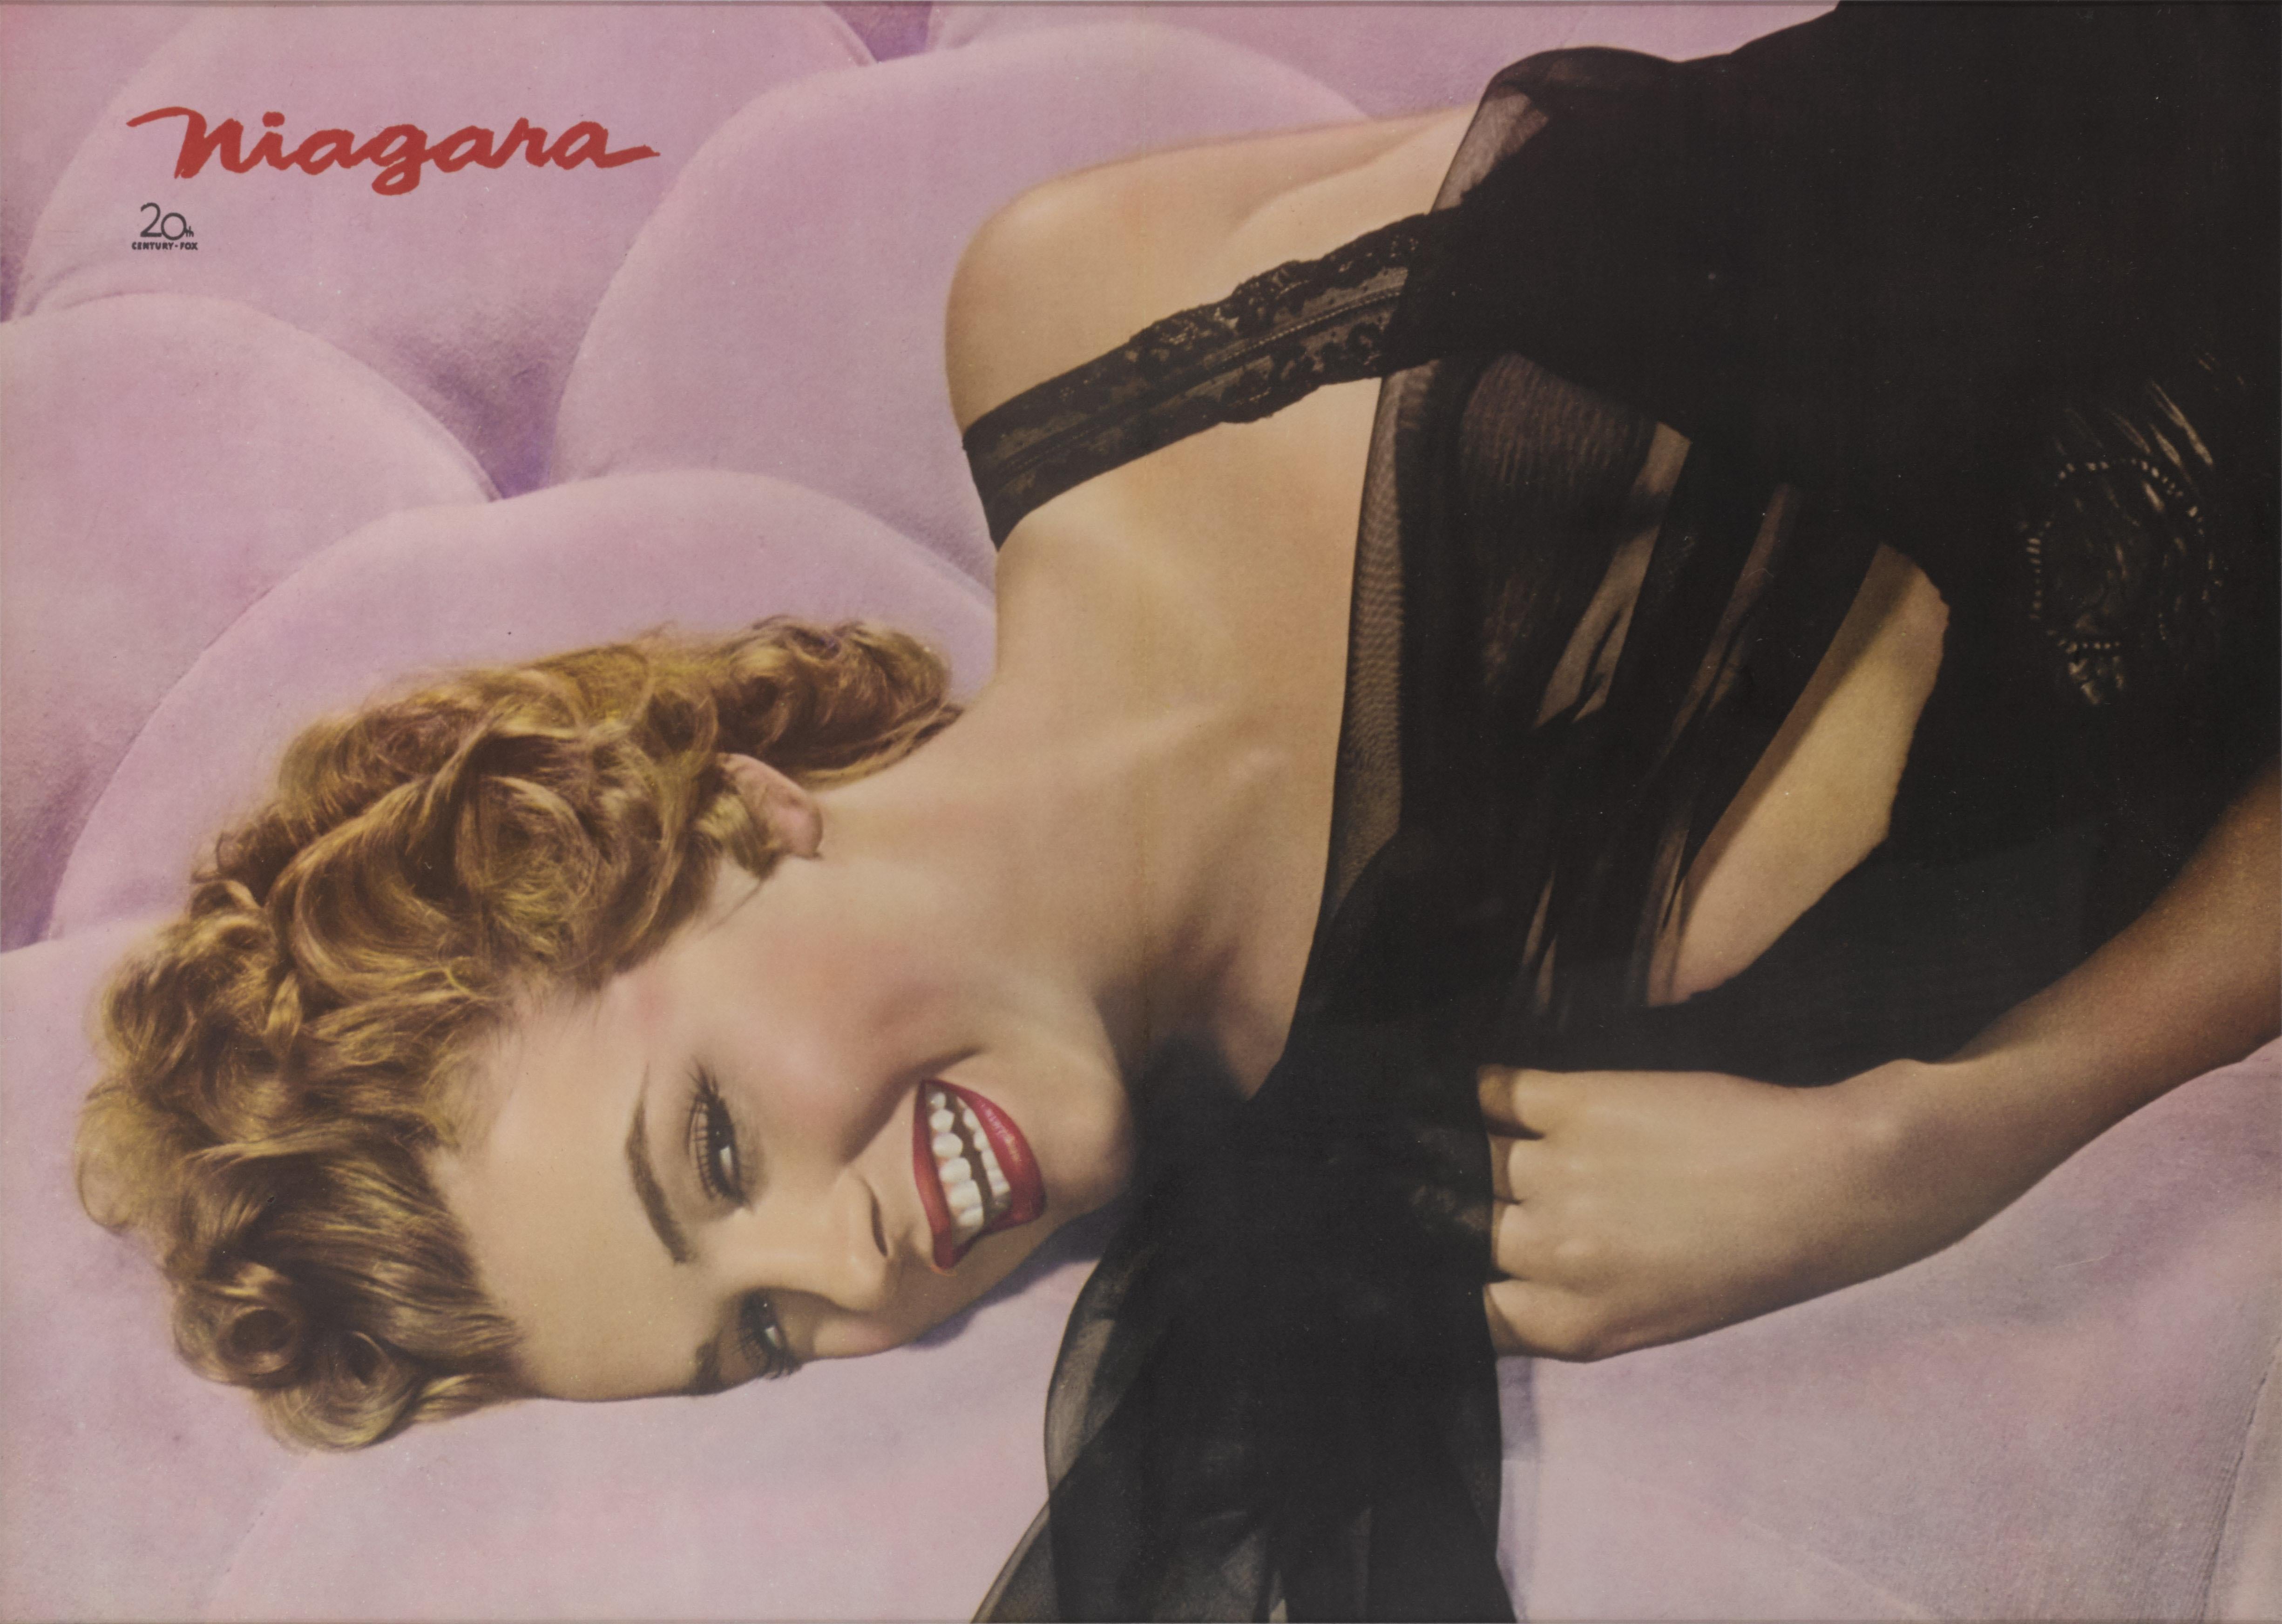 Original Japanese press sheet poster for the 1953 film “Niagara”.
This American film noir was directed by Henry Hathaway, and stars Marilyn Monroe, Joseph Cotten and Jean Peters. It tells the story of two couples who are visiting Niagara Falls. The